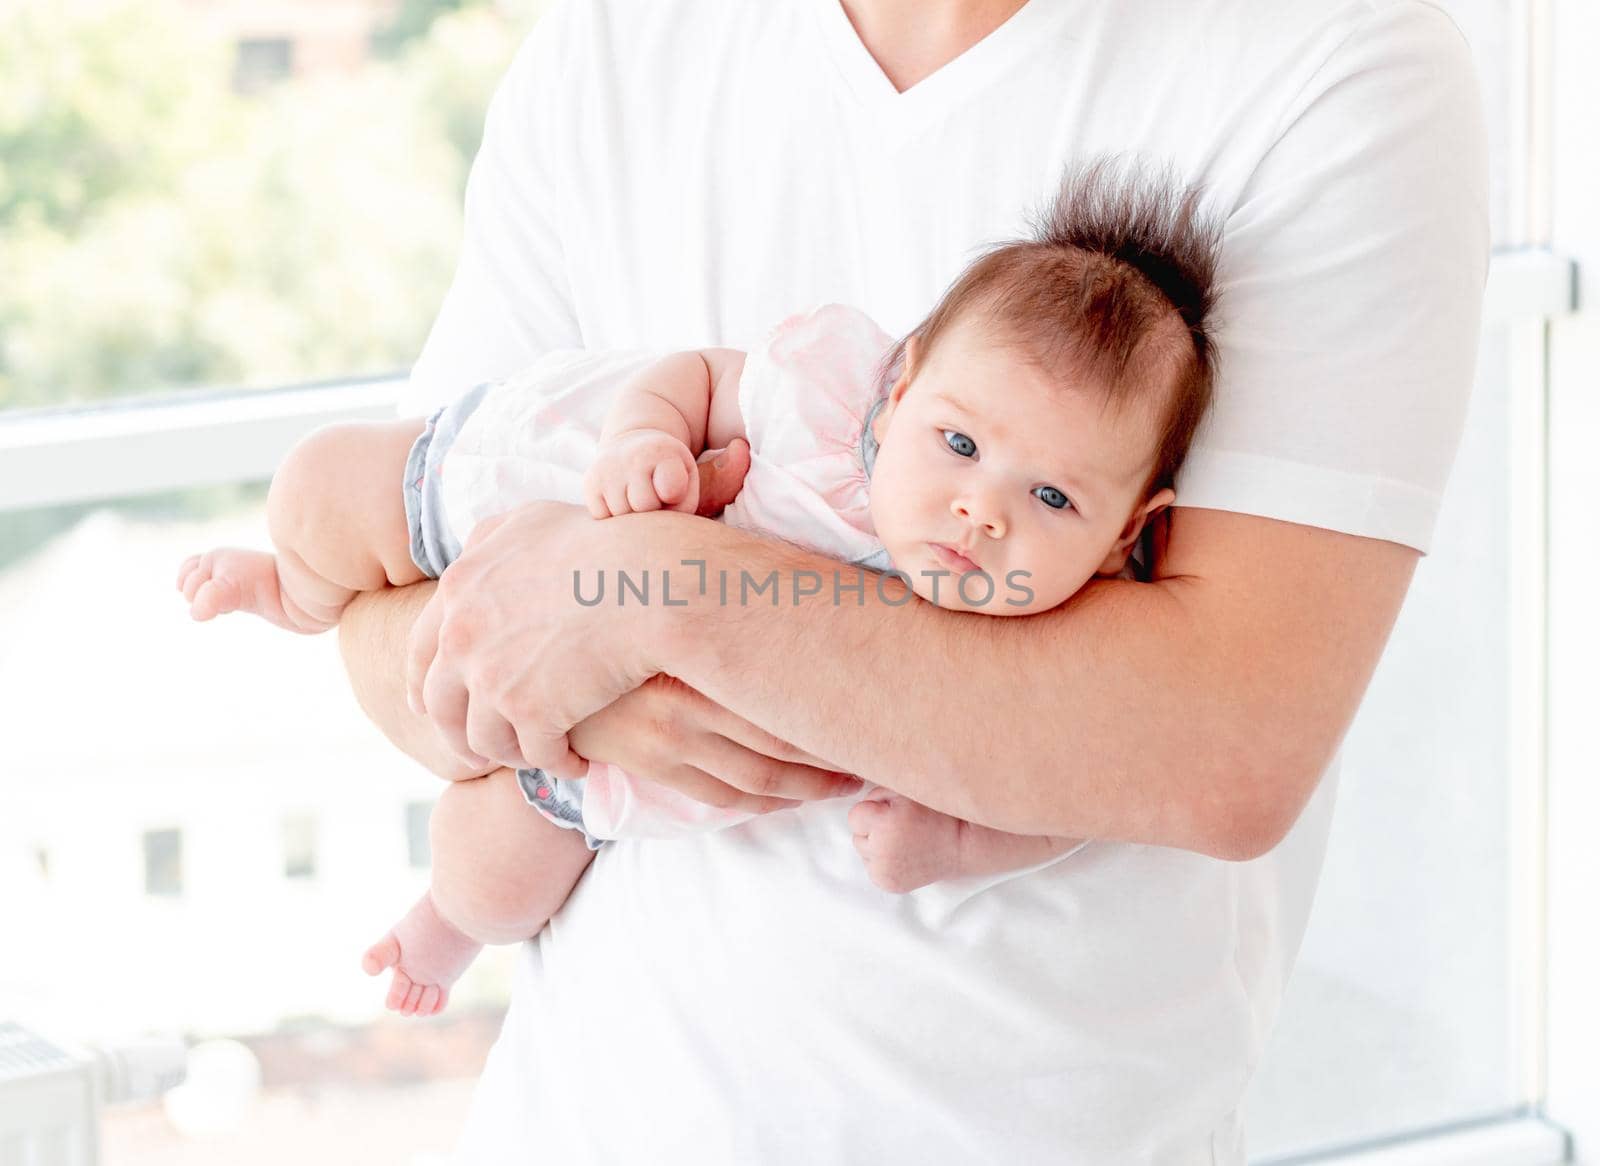 Baby protected by father's hands by tan4ikk1